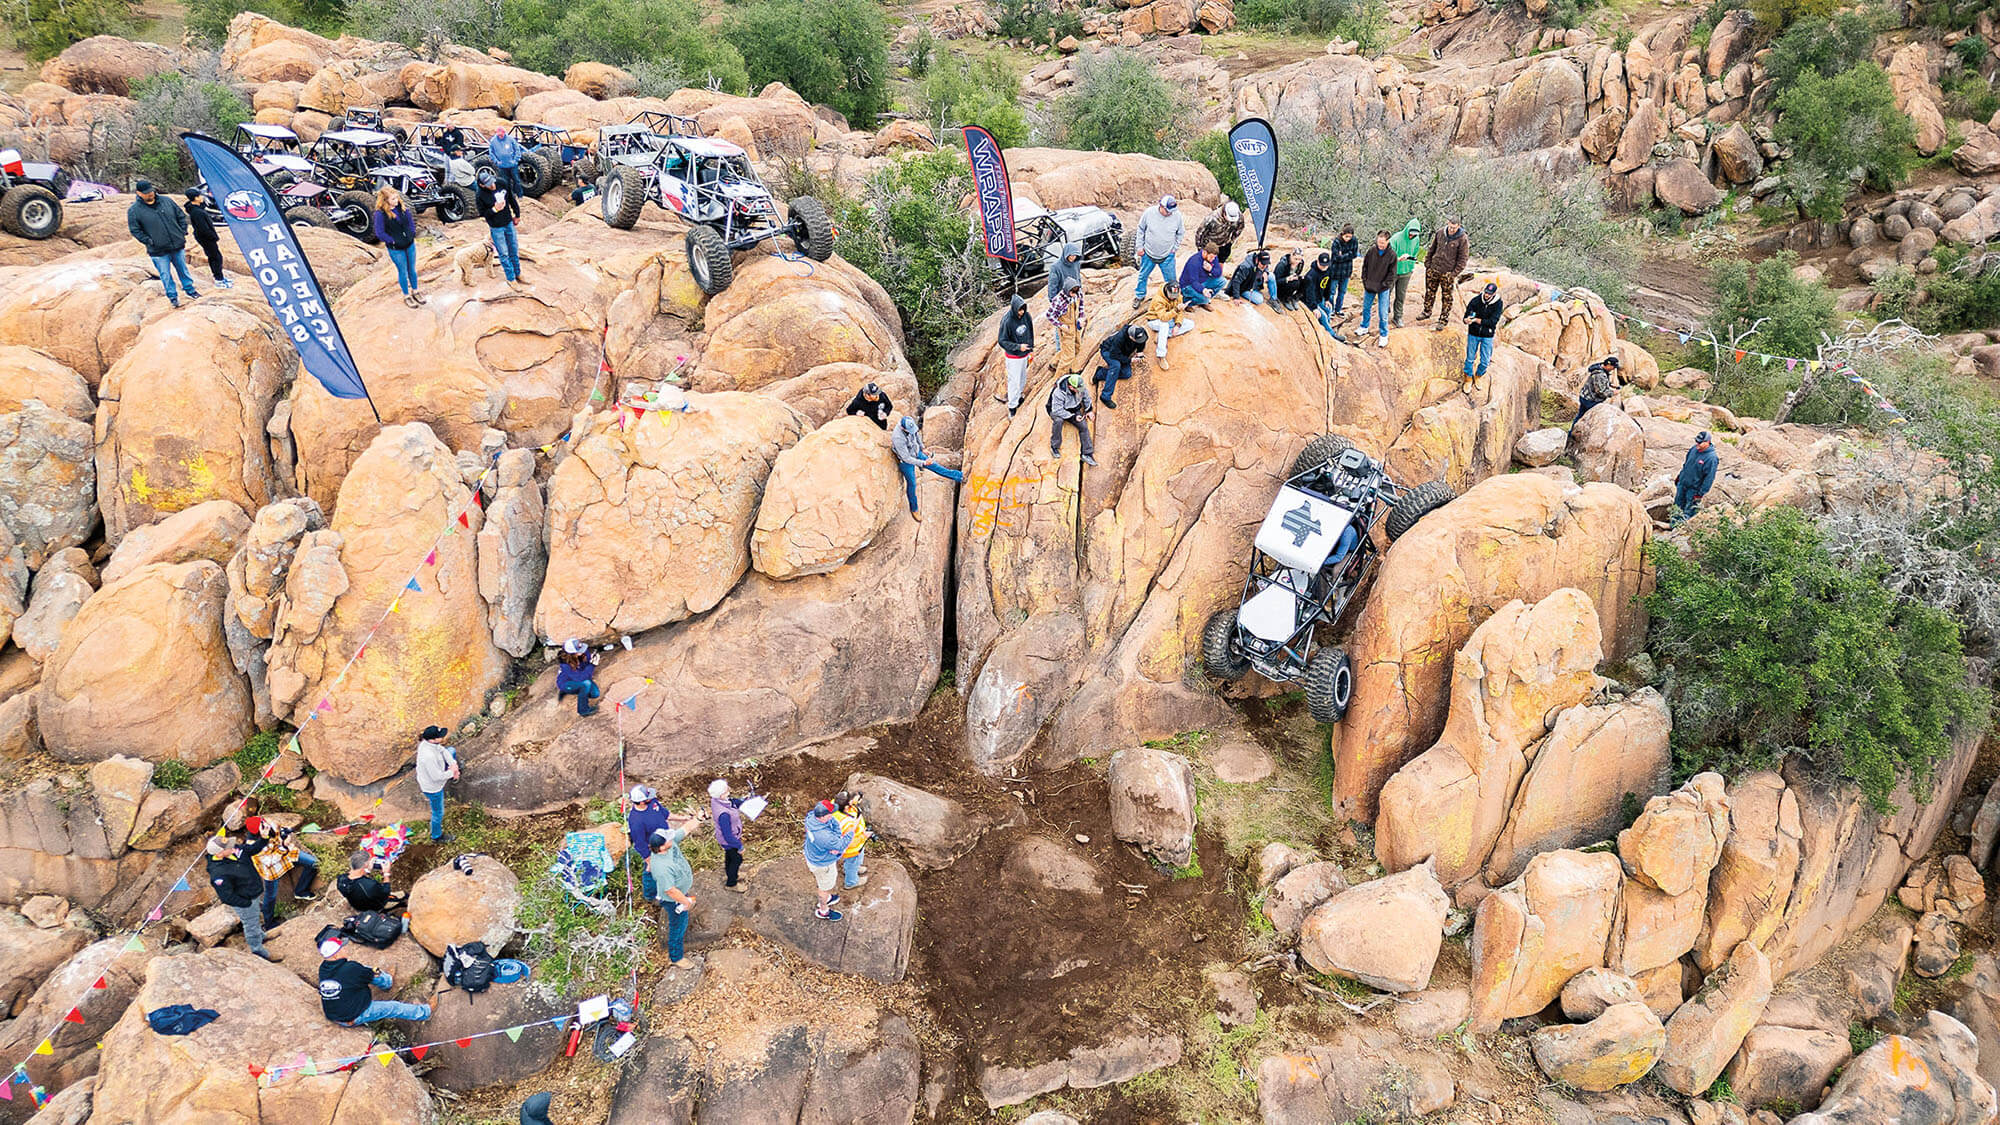 A group of people stand on tan rocks looking at a 4x4 vehicle attempting to scale the rock 